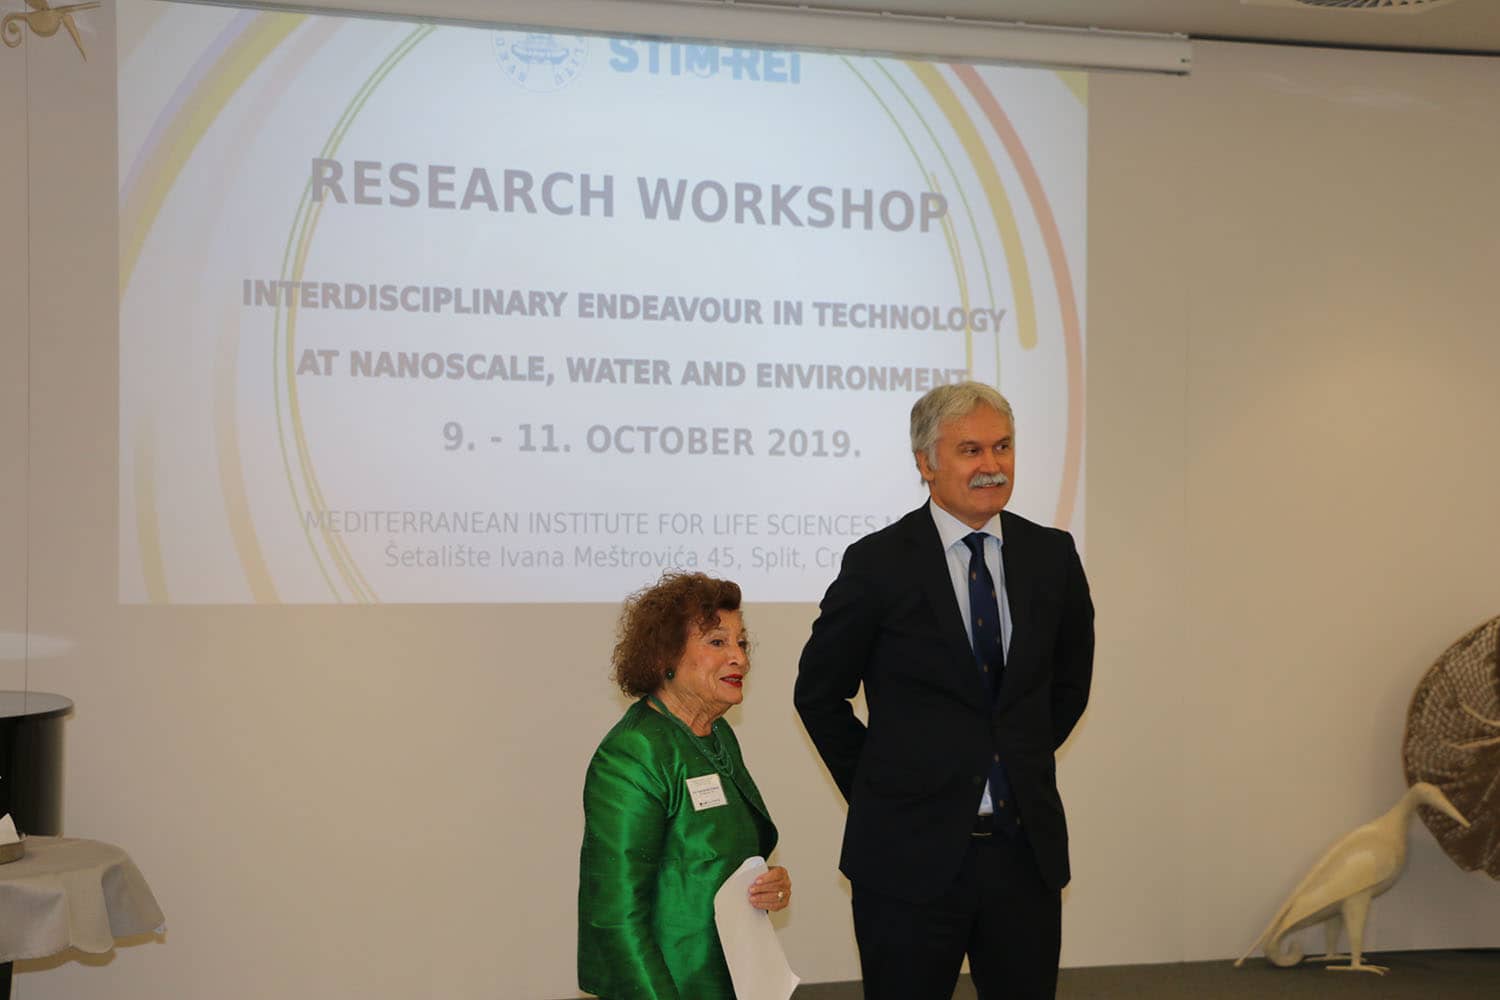 Research workshop “Interdisciplinary endeavors in nanotechnology, water and the environment” within the STIM-REI project begins